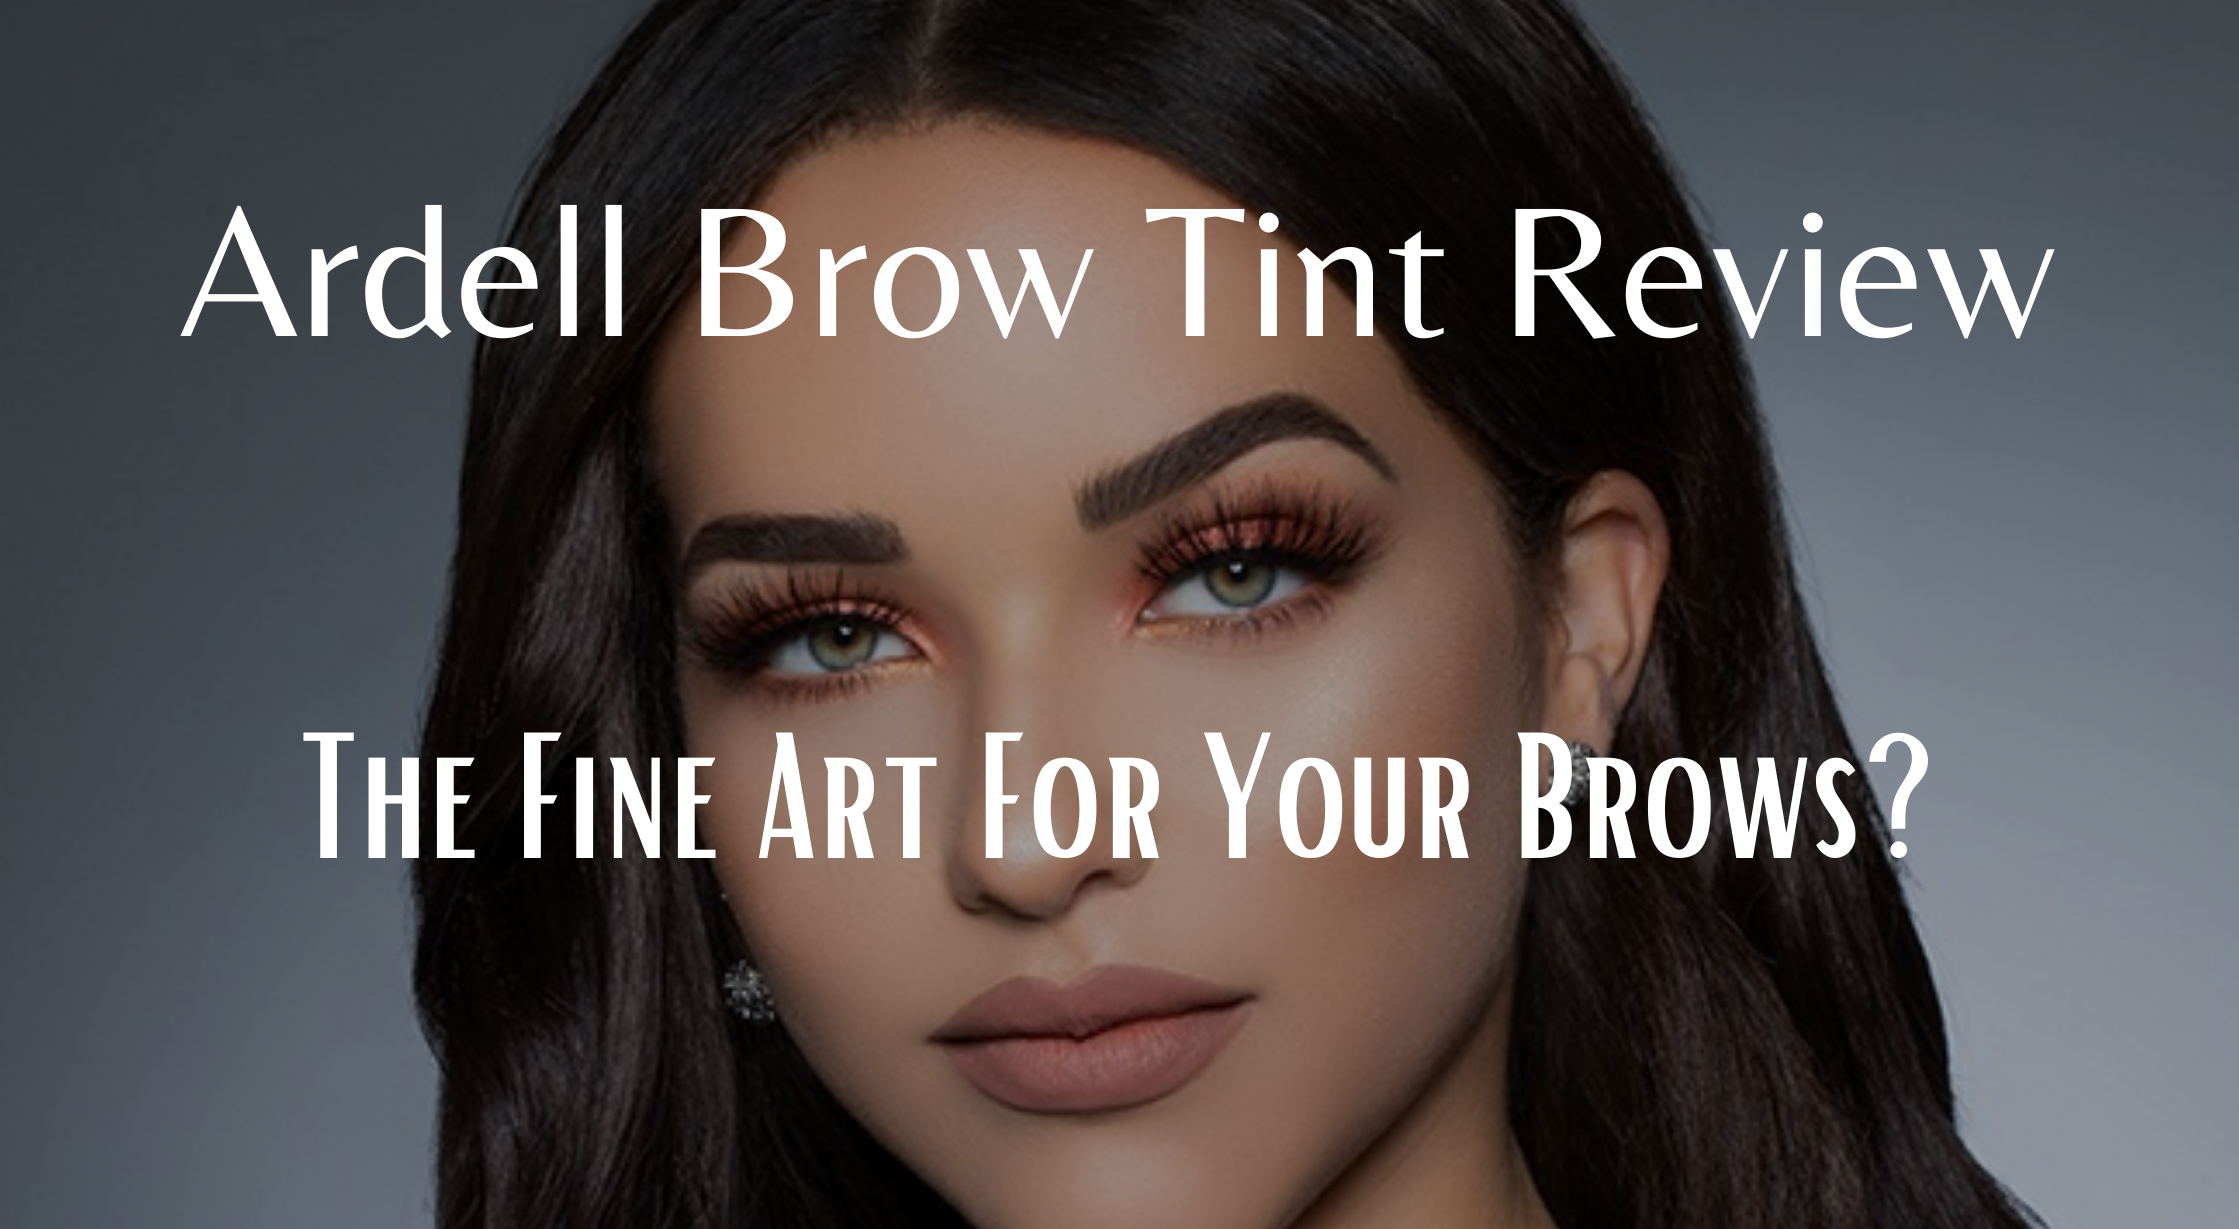 Ardell Brow Tint Reviews